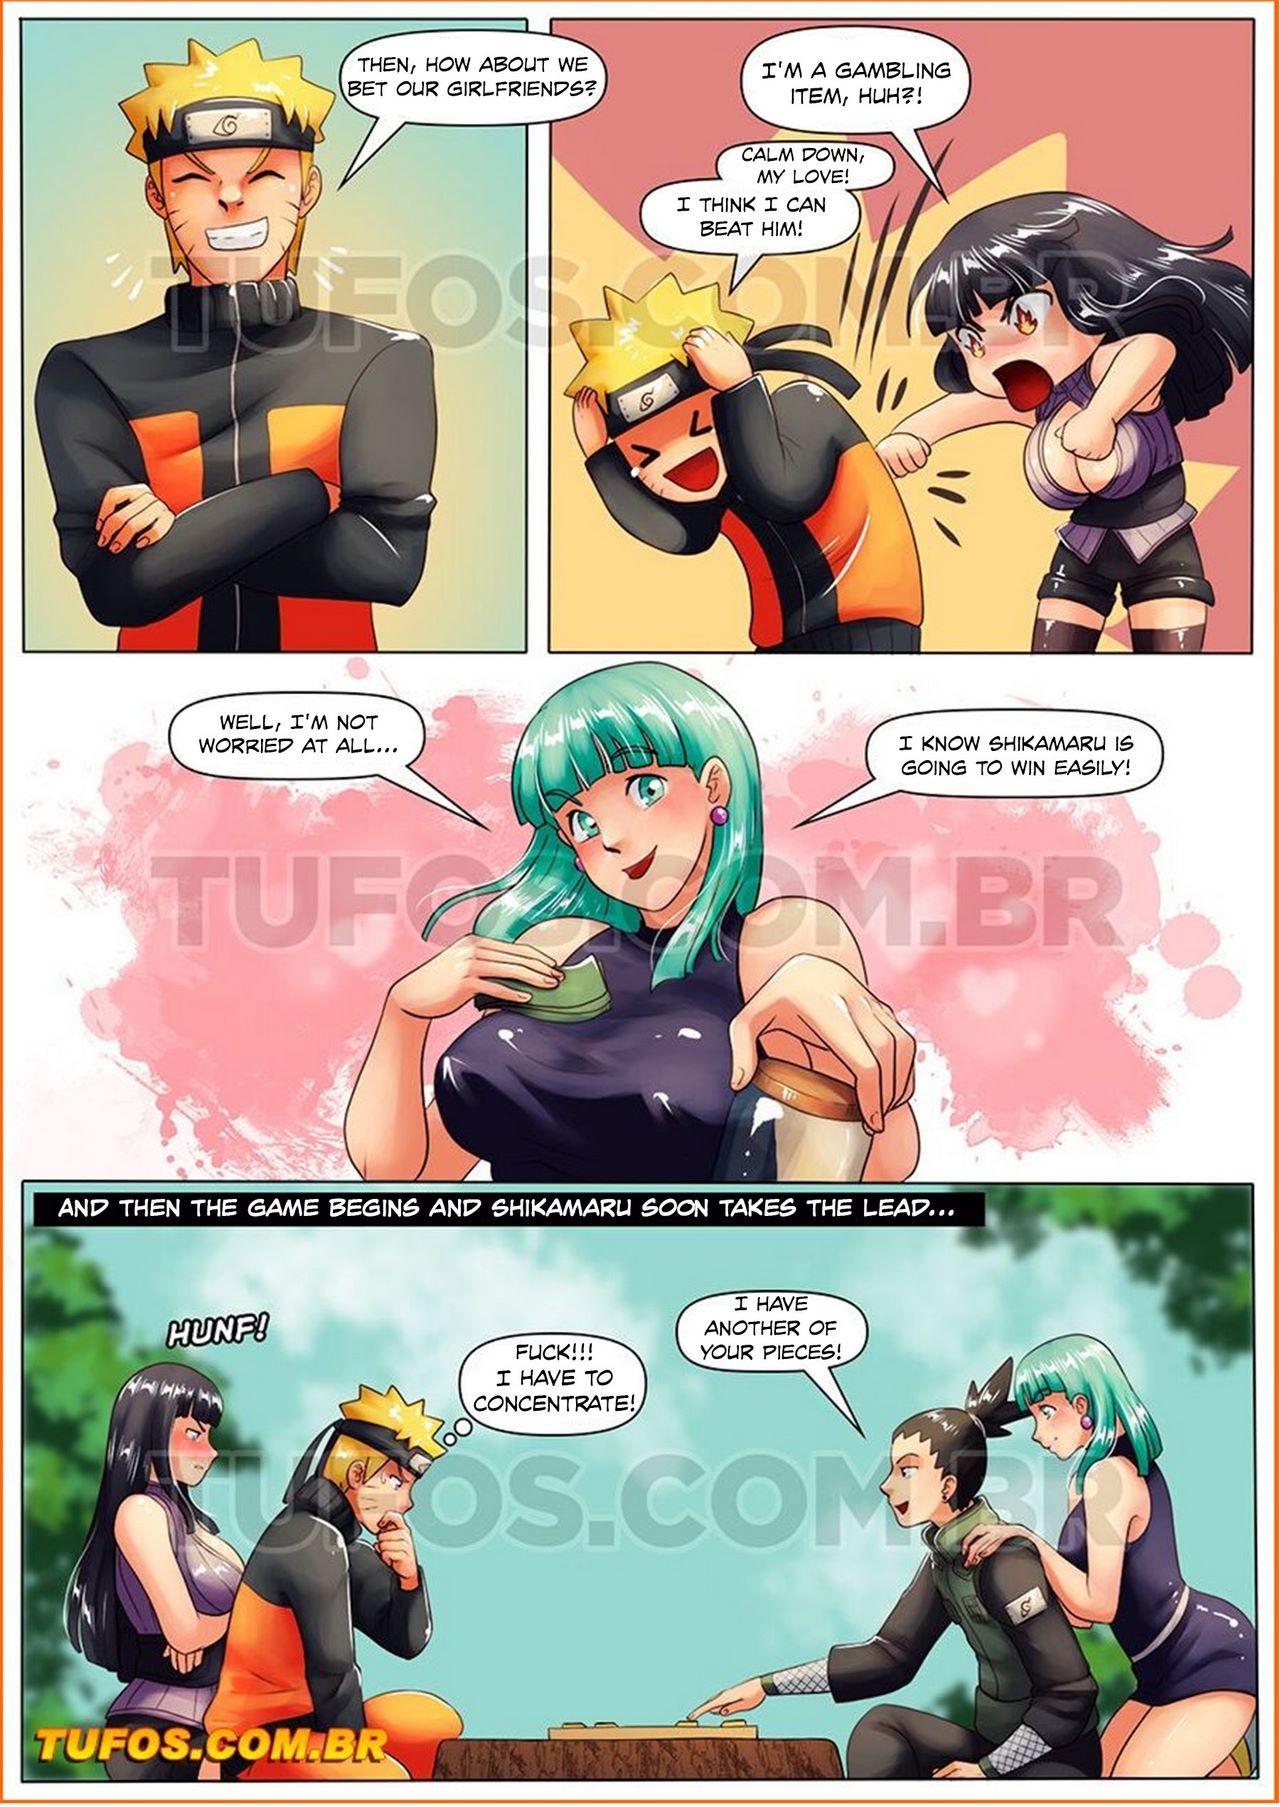 Narutoon 6 - Betting the Girlfriend porn comic picture 4